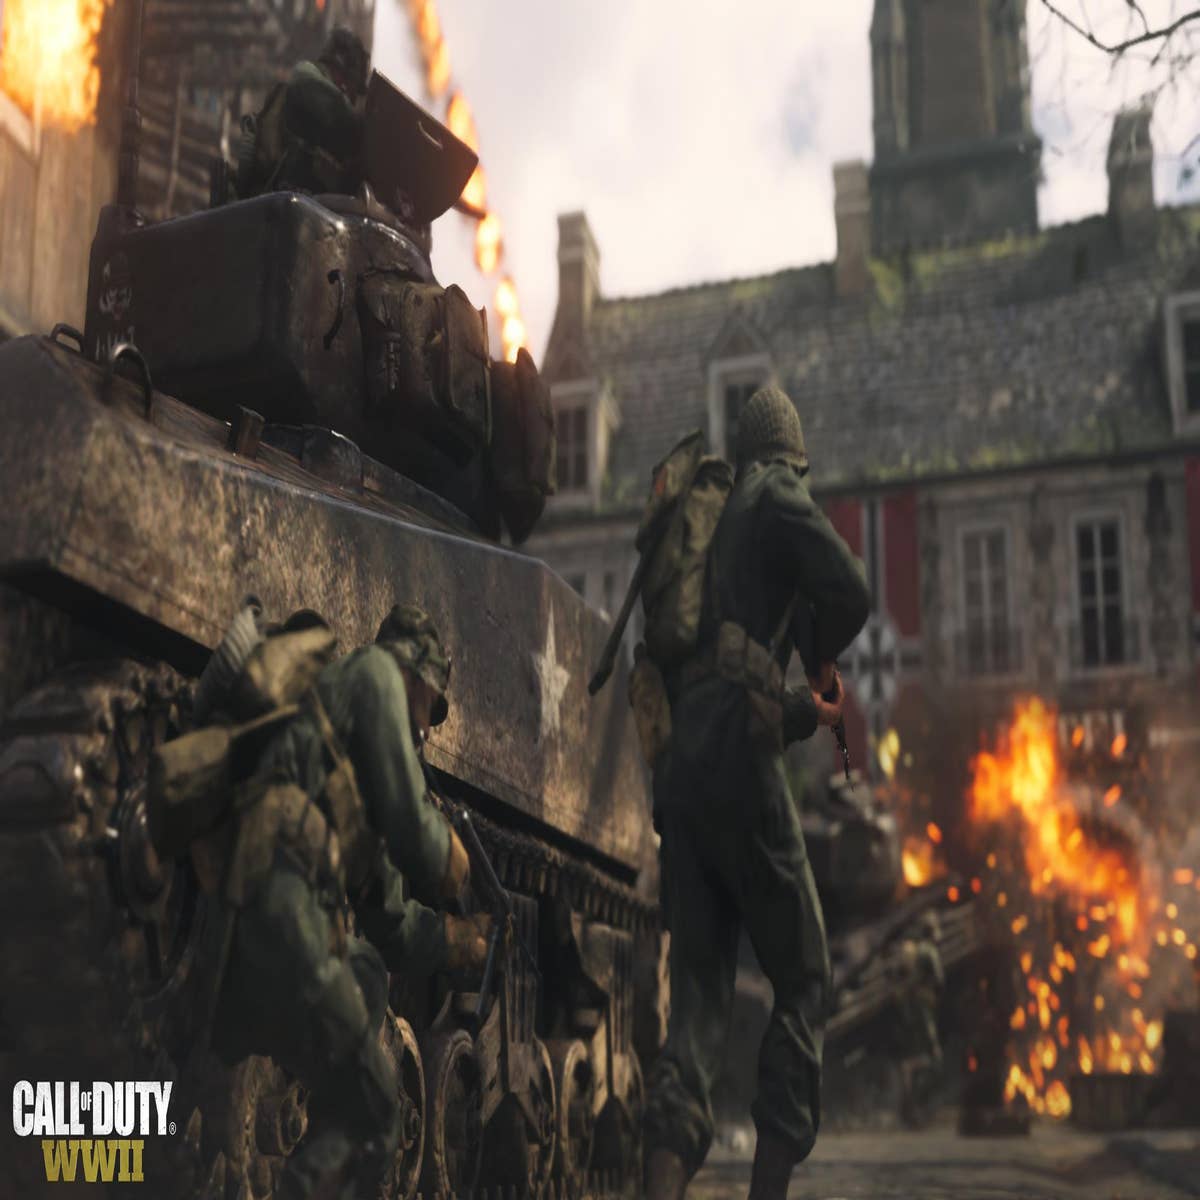 Call of Duty: WW2 Free Trial Weekend Announced For Steam